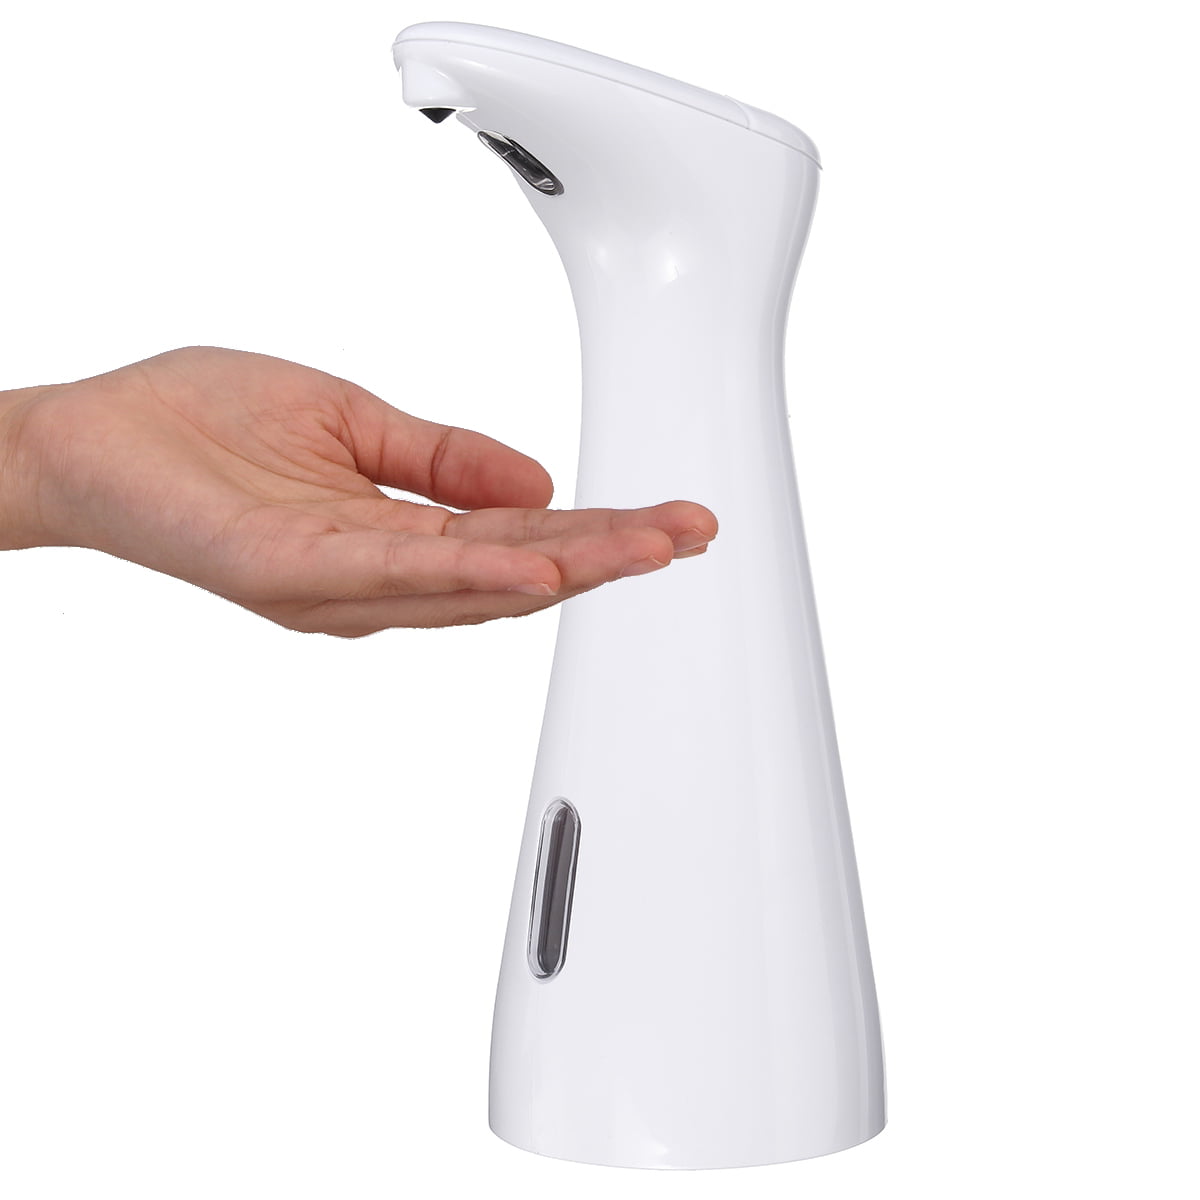 200ml Automatic Soap Dispenser Touchless  Infrared Sensor Bathroom//Kitchen Clean